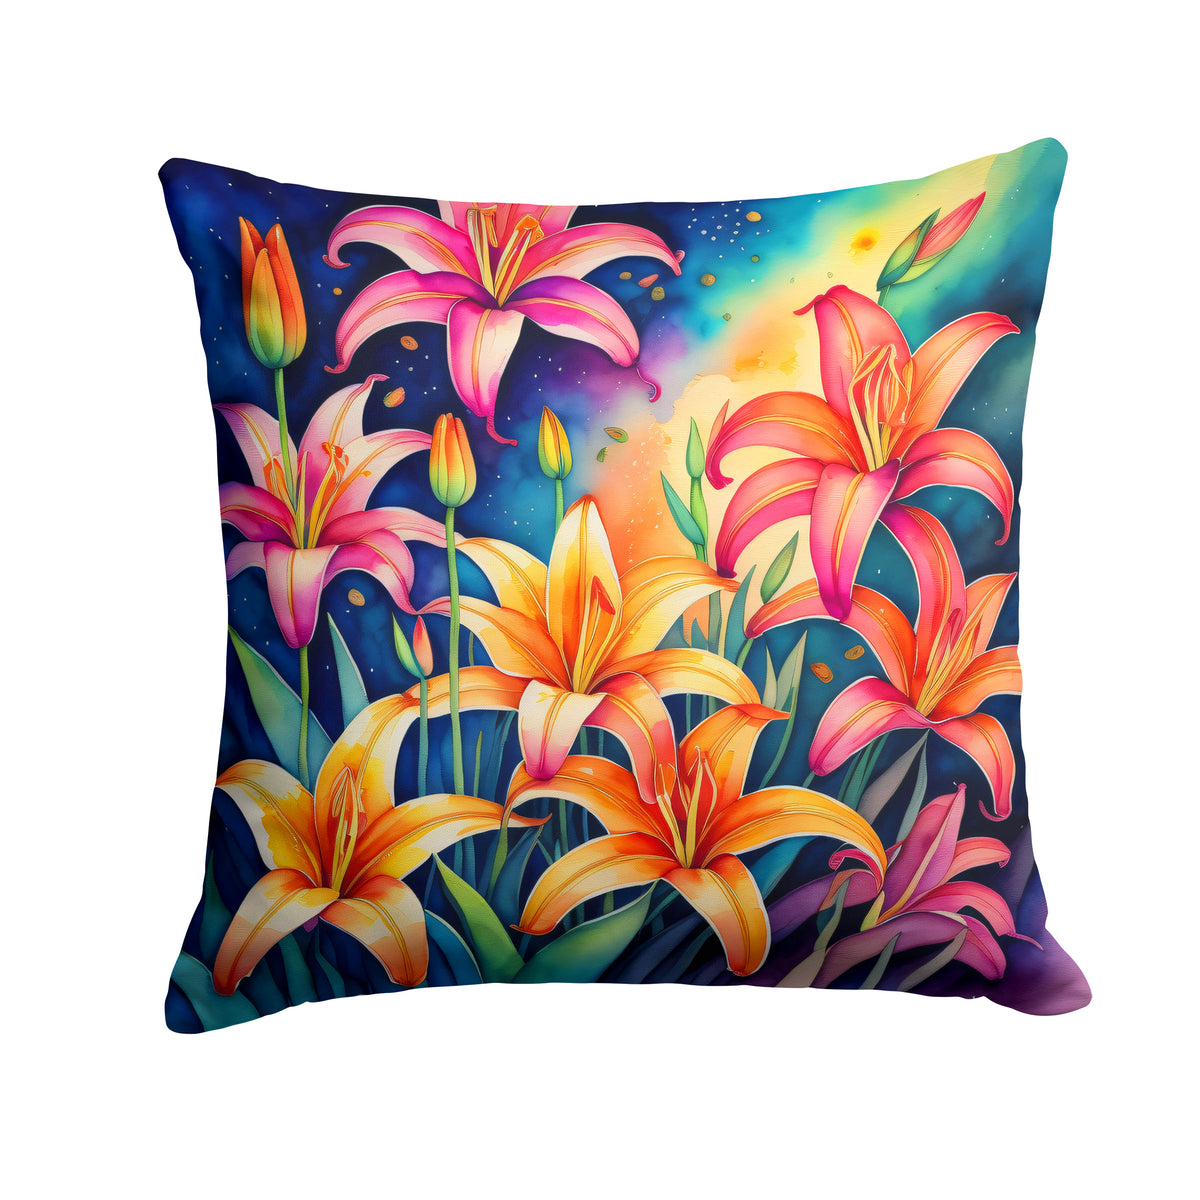 Buy this Colorful Lilies Fabric Decorative Pillow